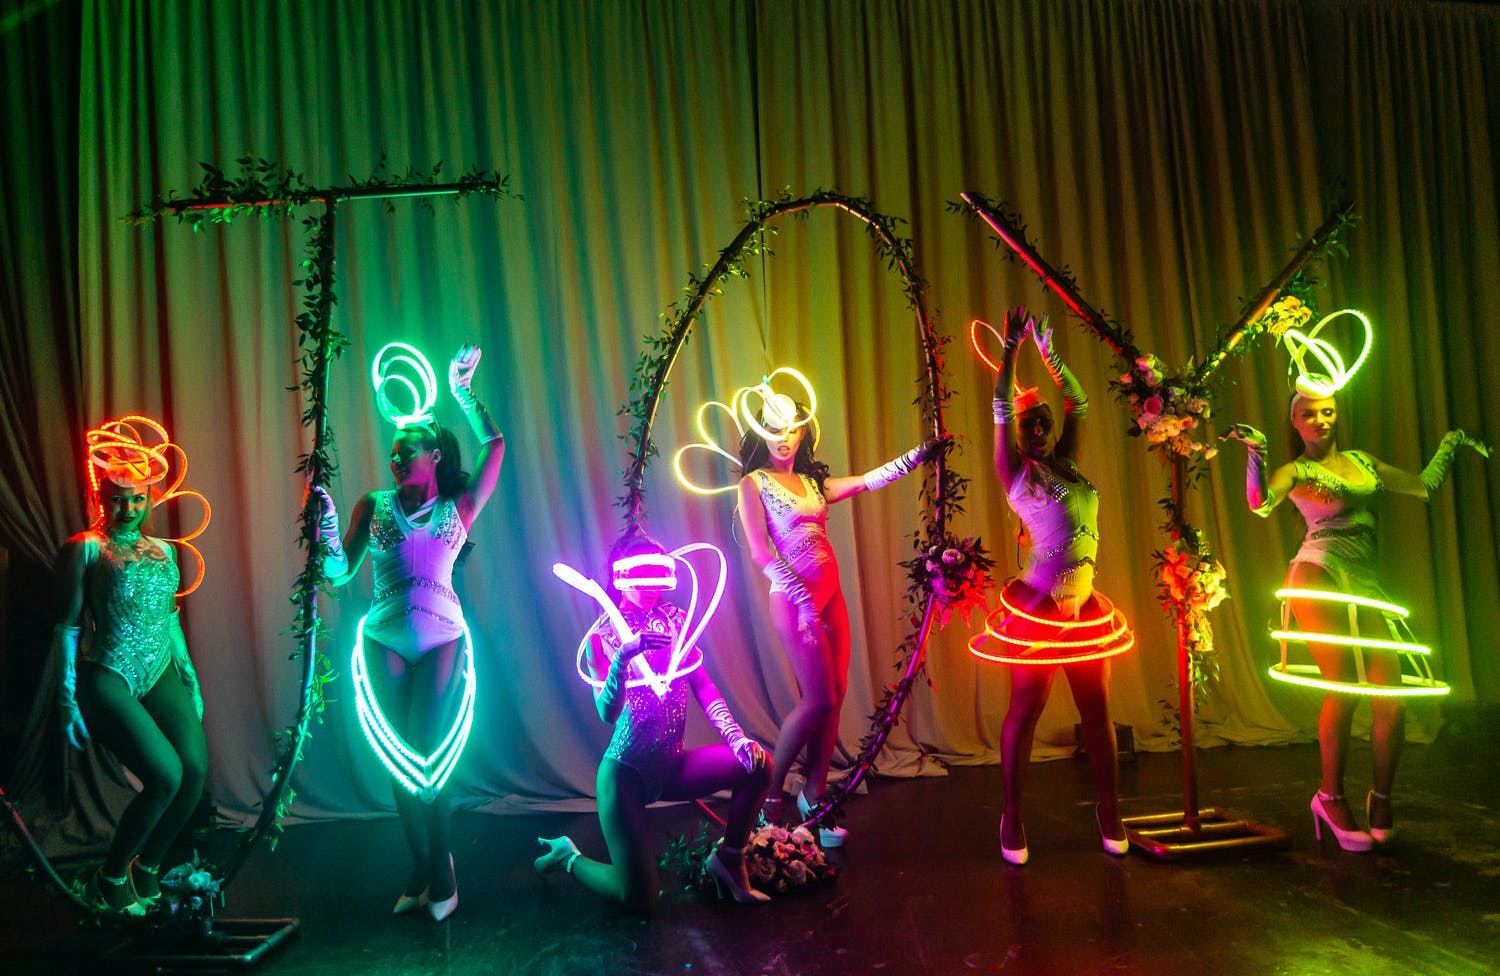 Performers in Neon Costumes at Neon Party | PartySlate